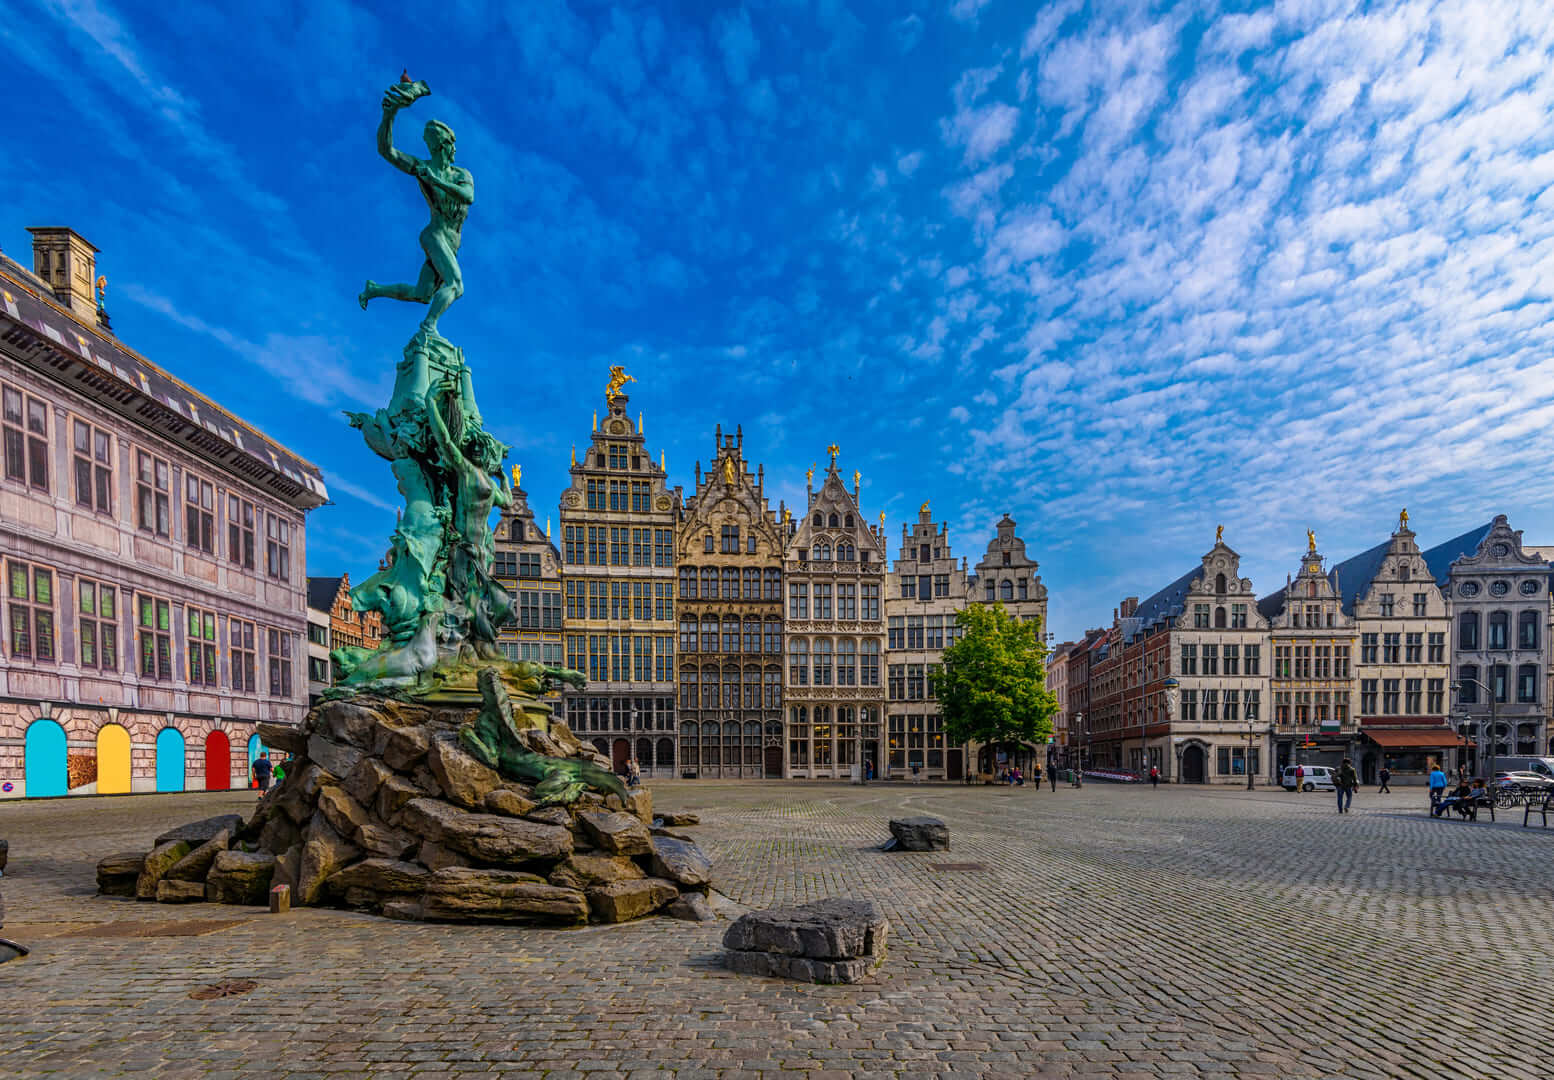 The Grote Markt (Great Market Square) of Antwerpen (Antwerp), Belgium. It is a town square situated in the heart of the old city quarter of Antwerpen. Cityscape of Antwerp.
